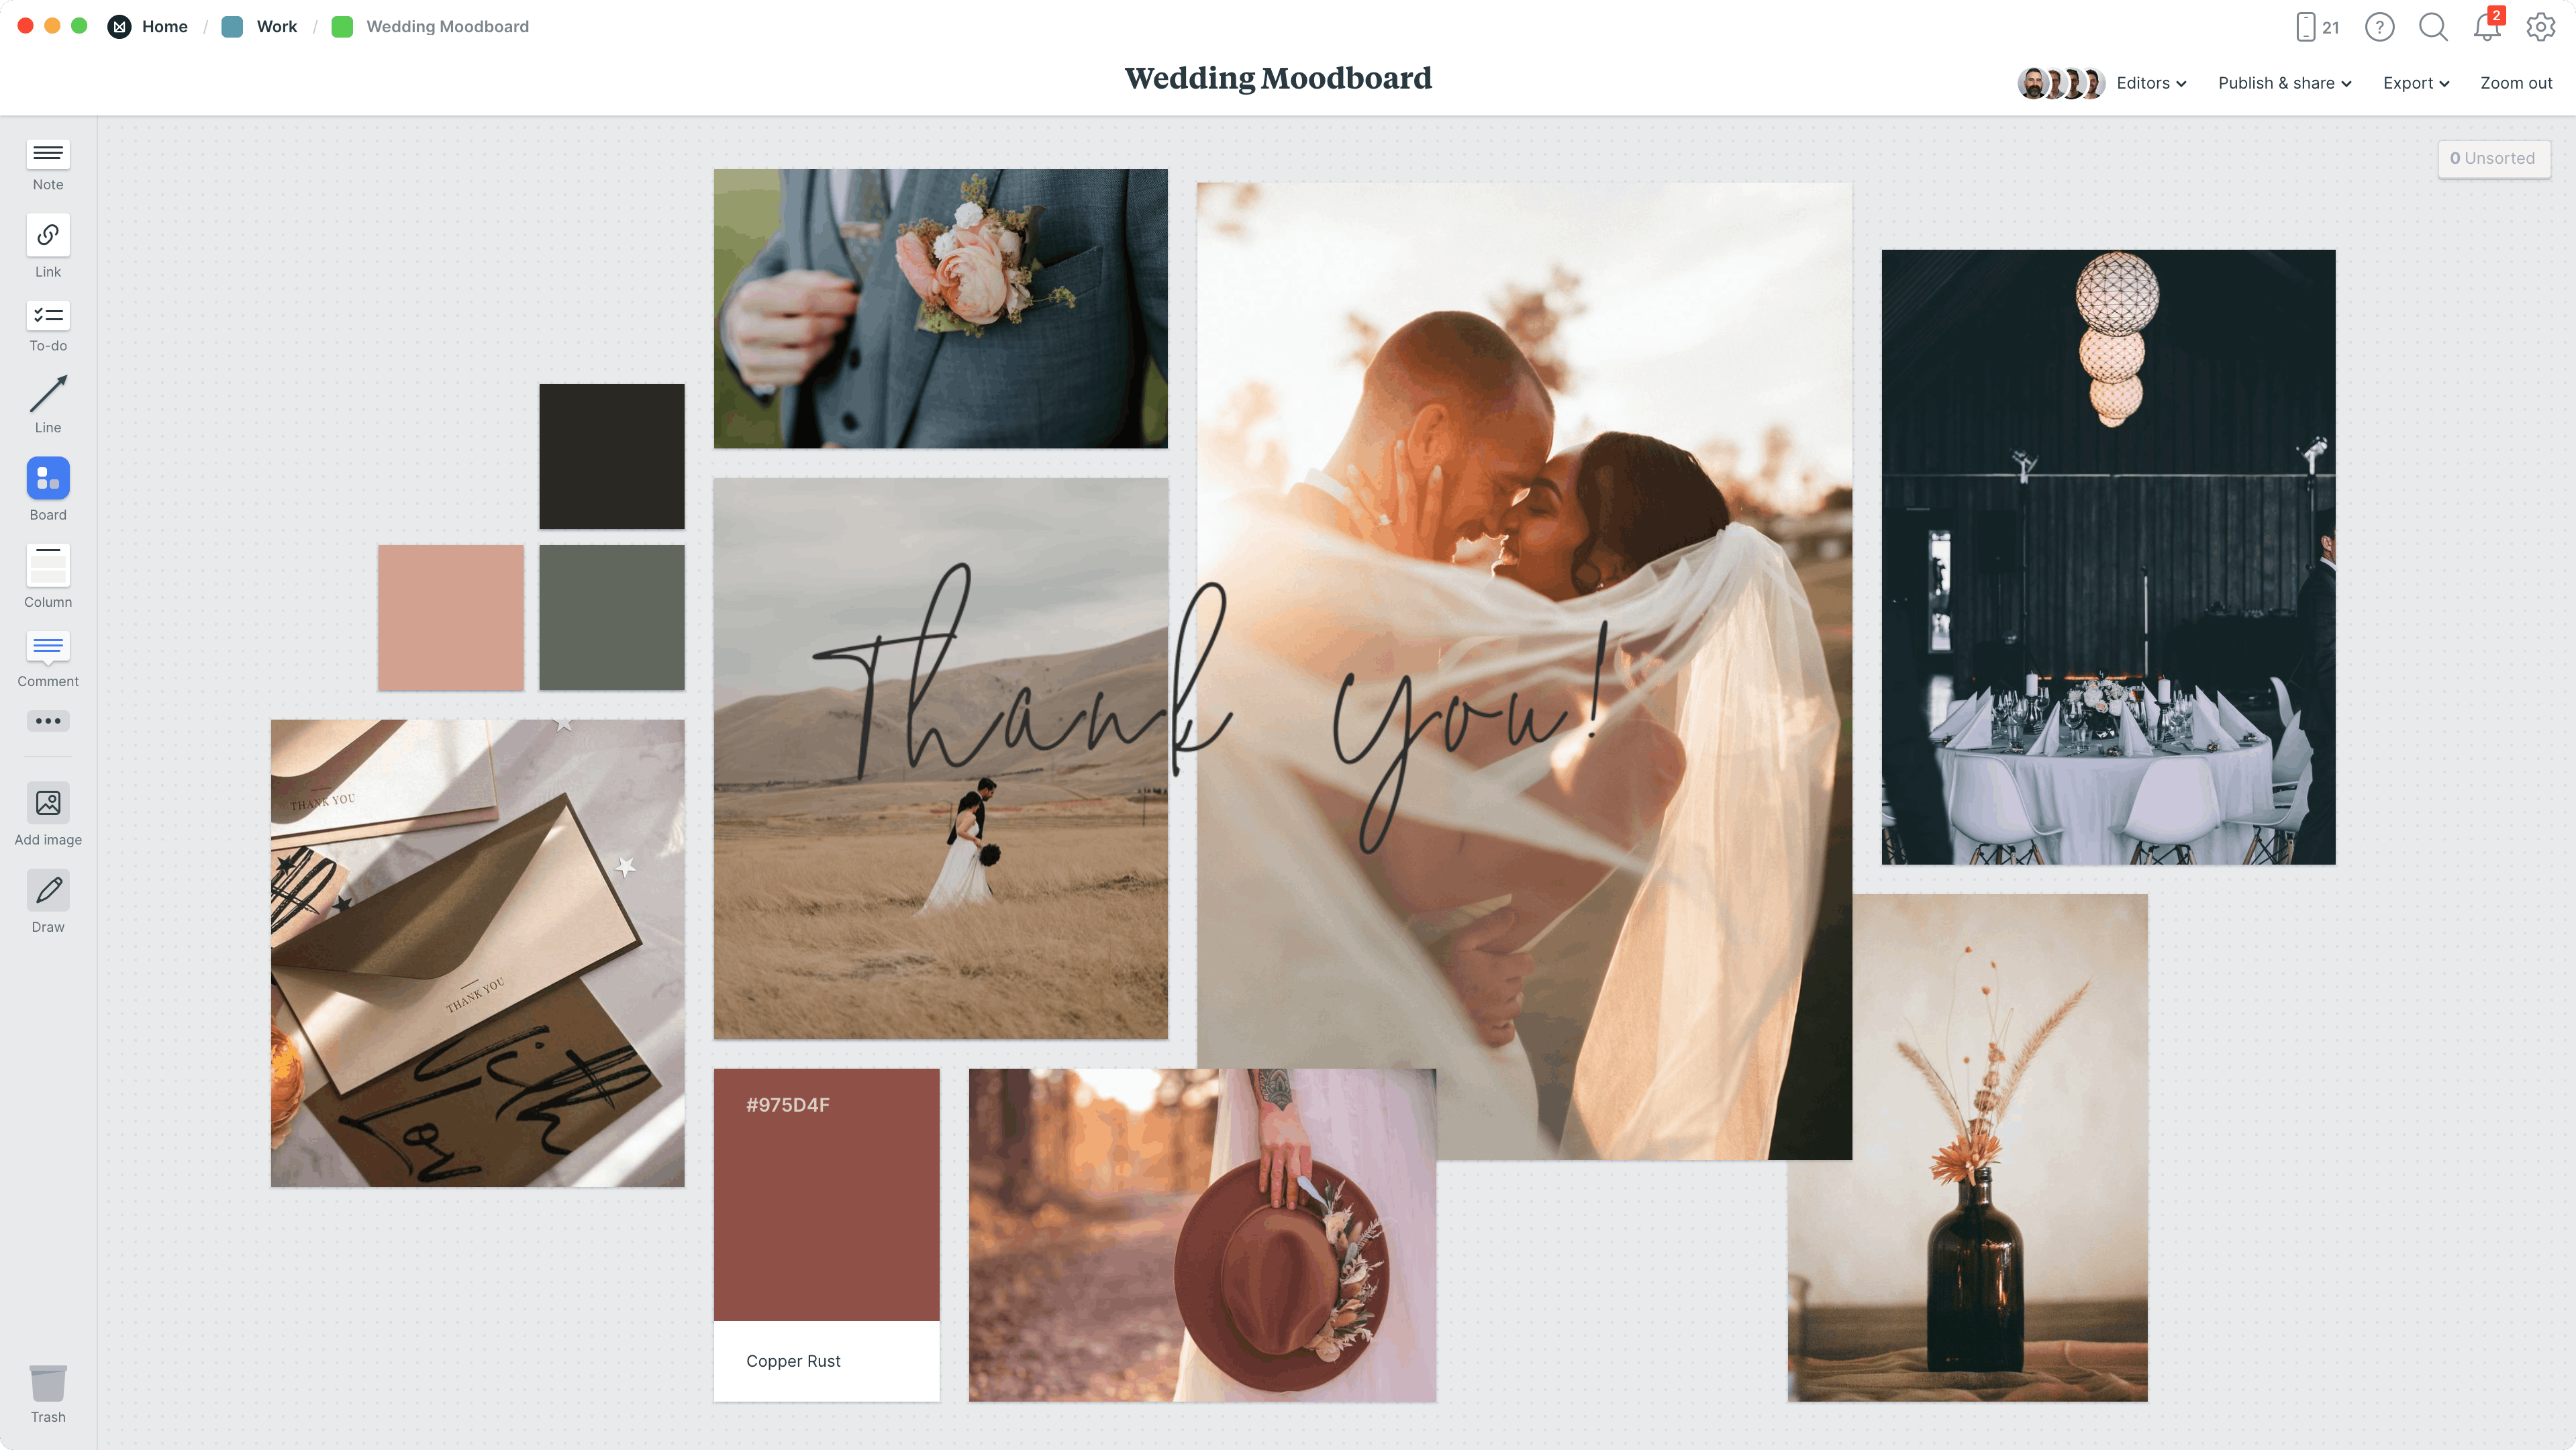 Wedding Moodboard Template, within the Milanote app